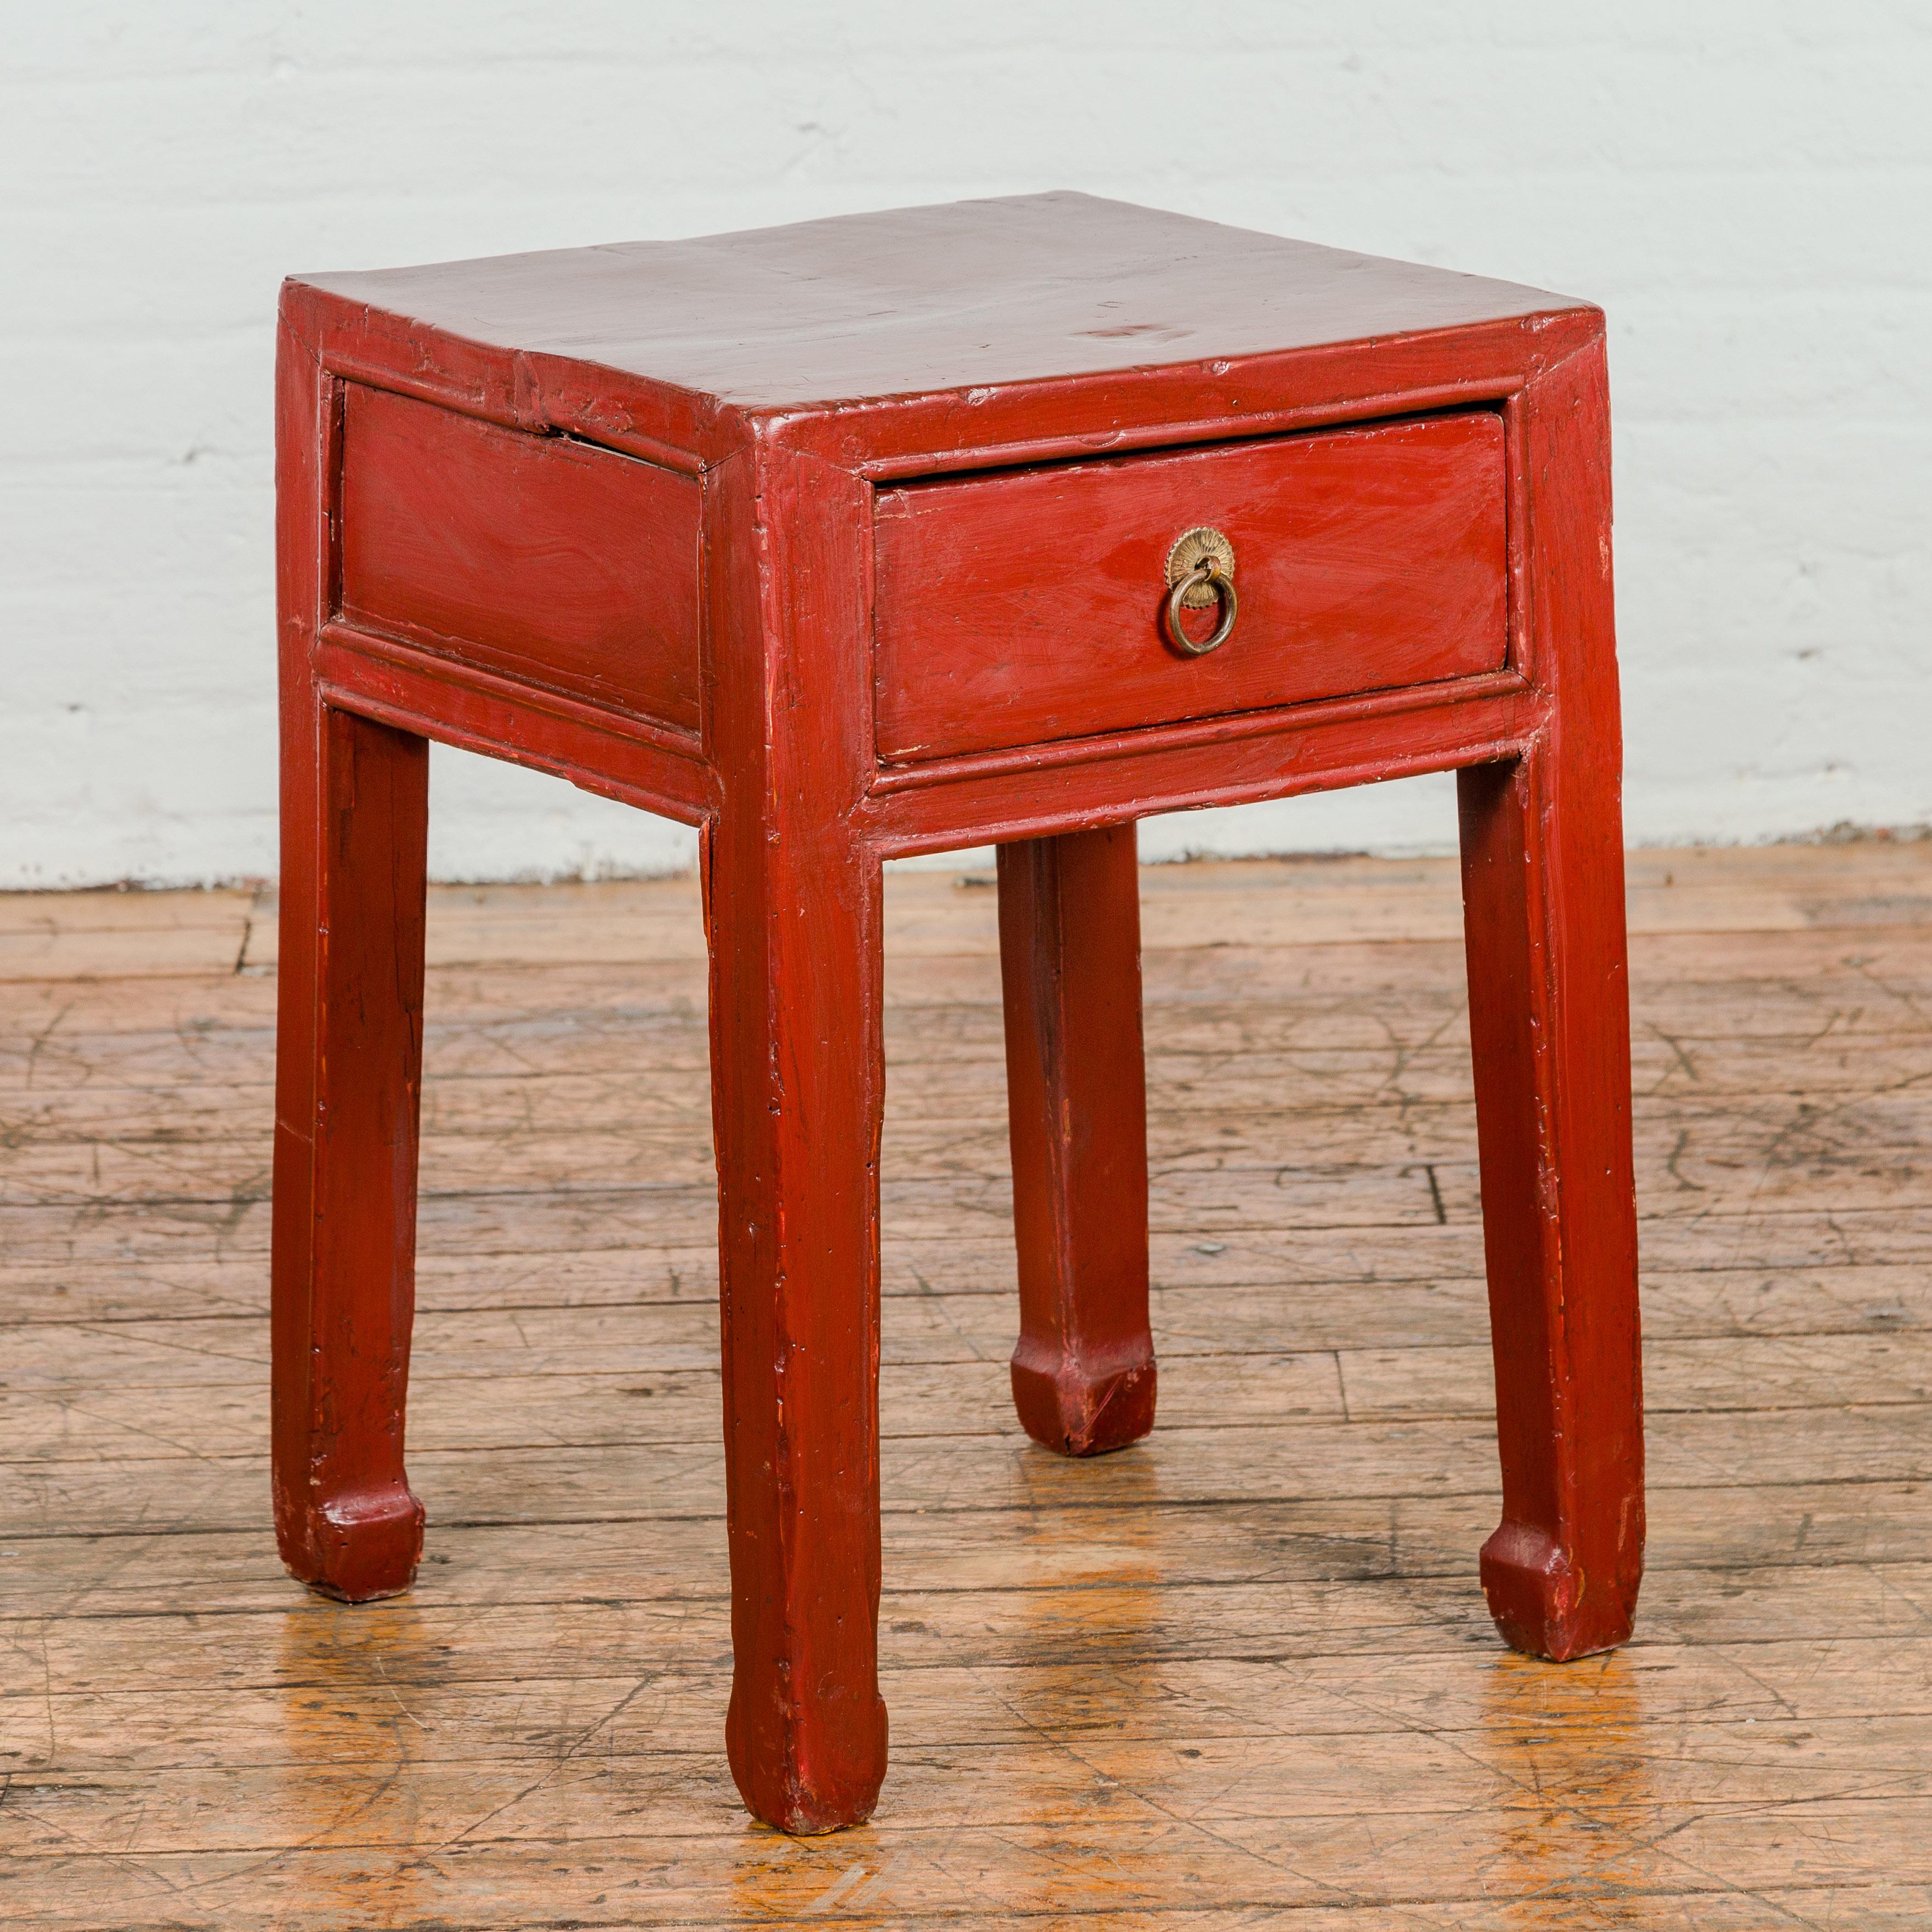 Late Qing Dynasty Red Lacquer Side Table with Single Drawer and Horse Hoof Feet For Sale 1